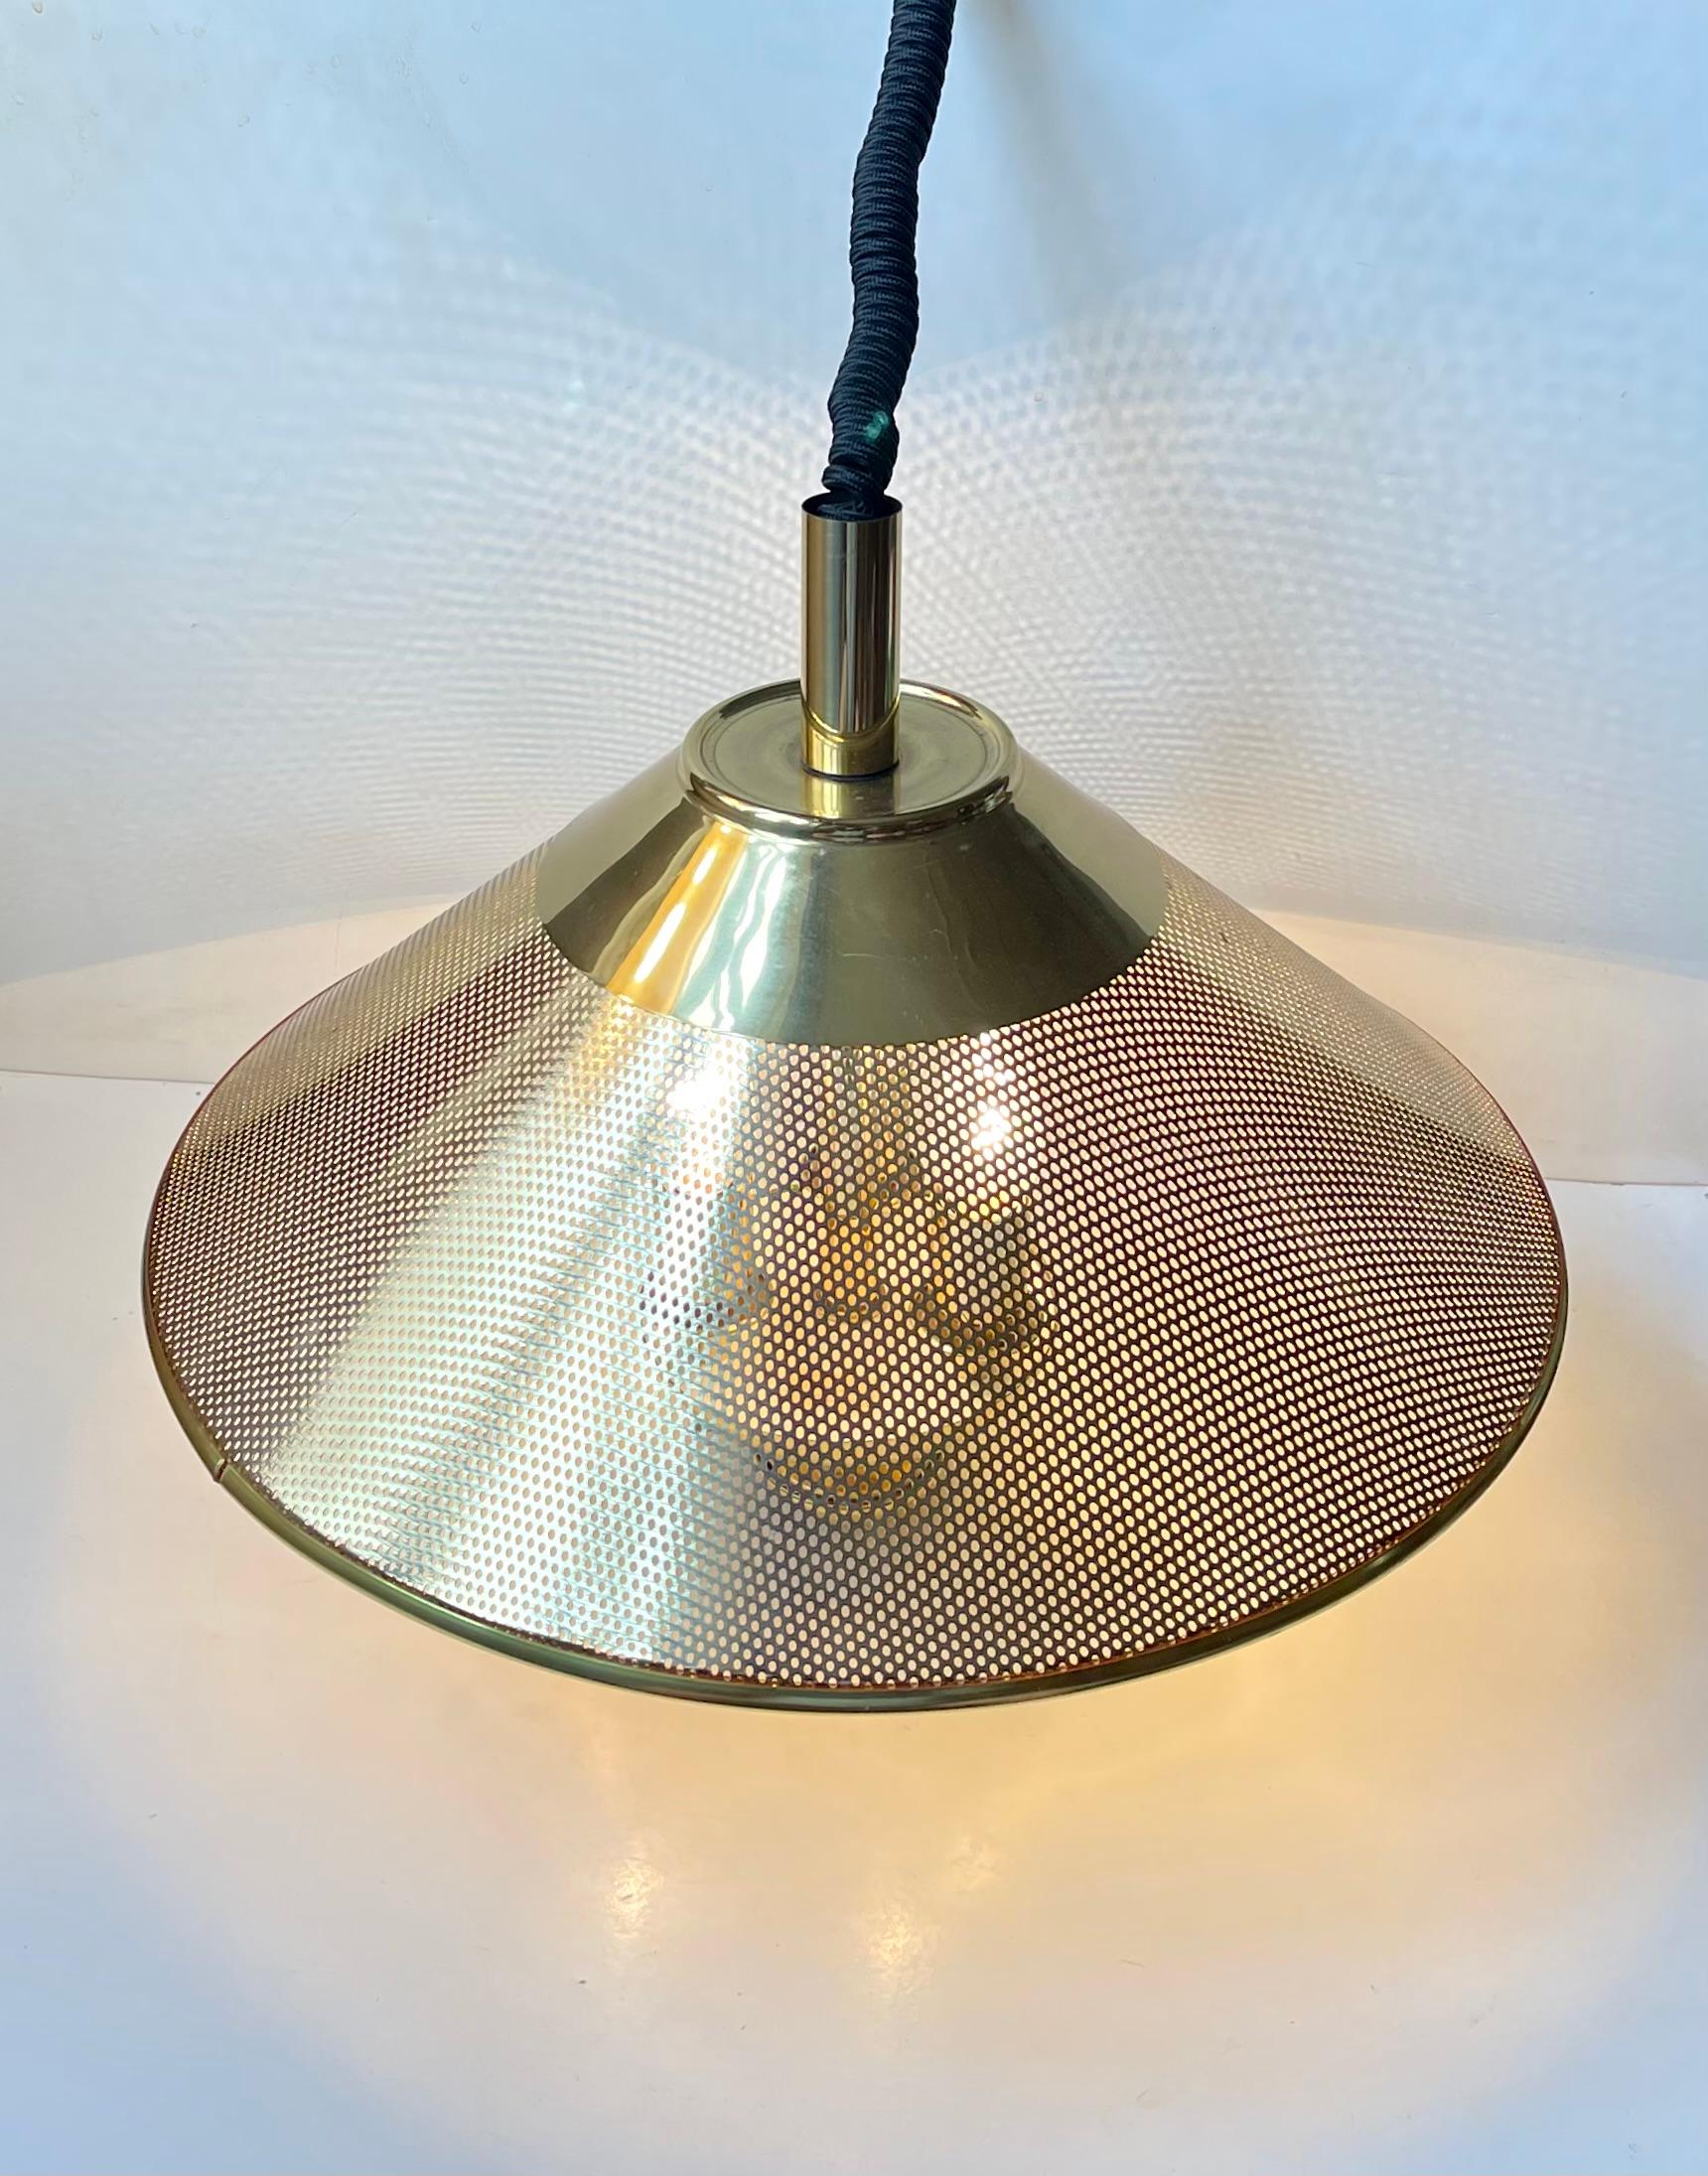 A stylish height adjustable vintage Danish hanging Lamp. The style is Nautical/Maritime and it will add a cosy twist to any modern interior. The light is in a very nice vintage condition with light ware and natural patination to the solid brass. It